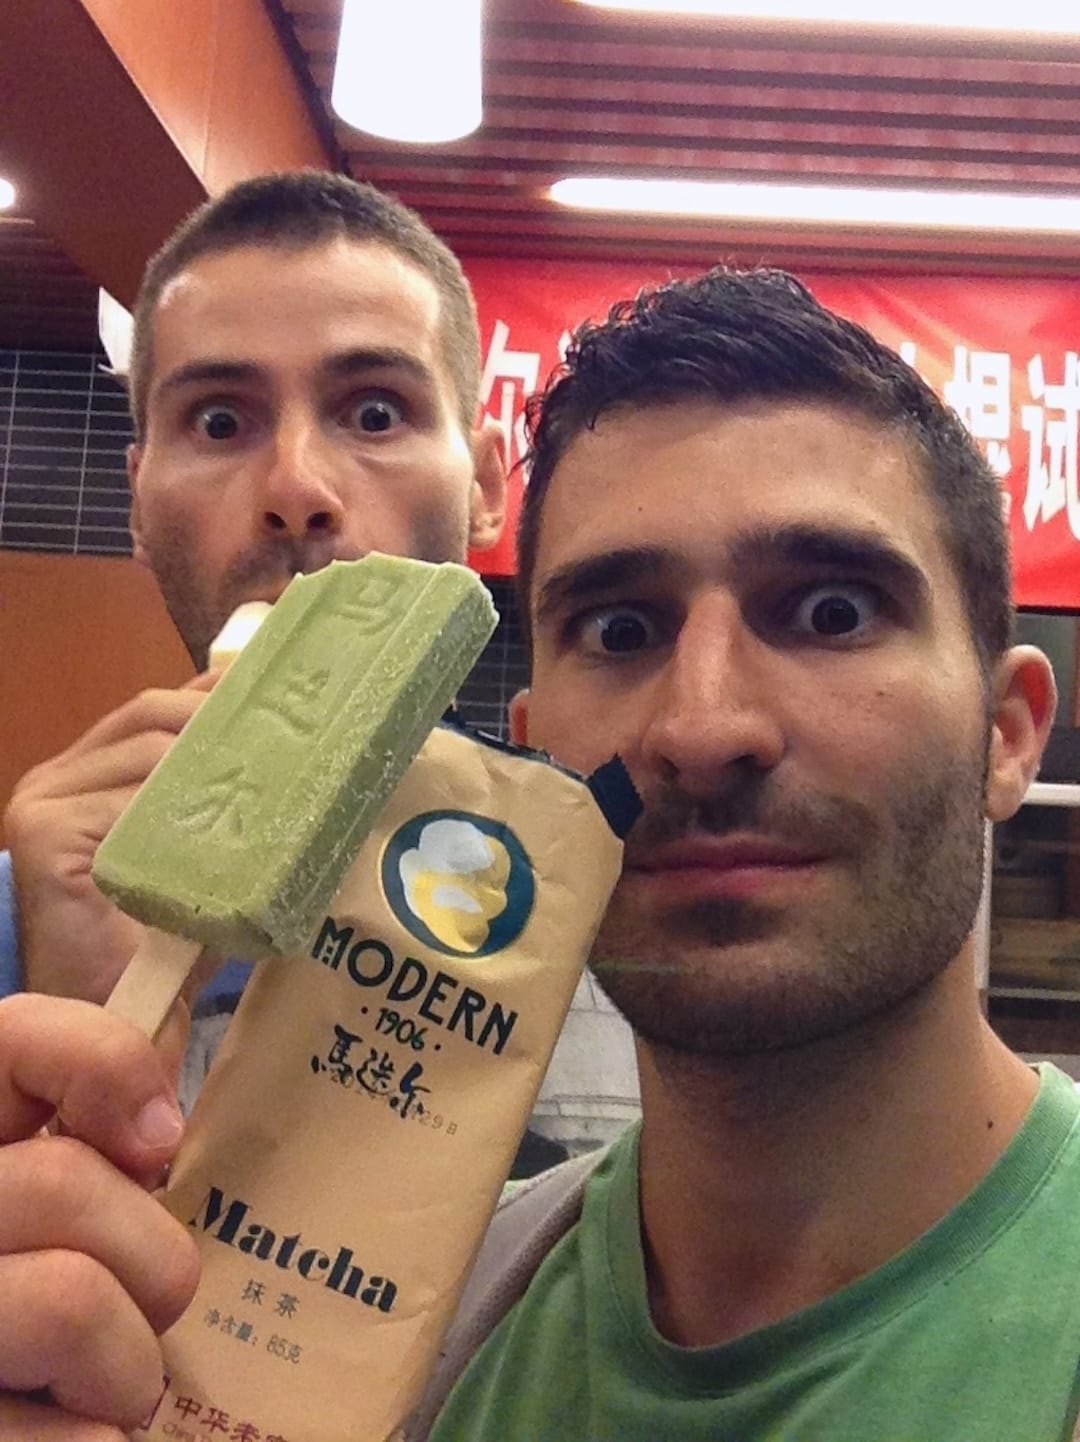 Matcha green tea flavour ice lolly best traditional food of Japan